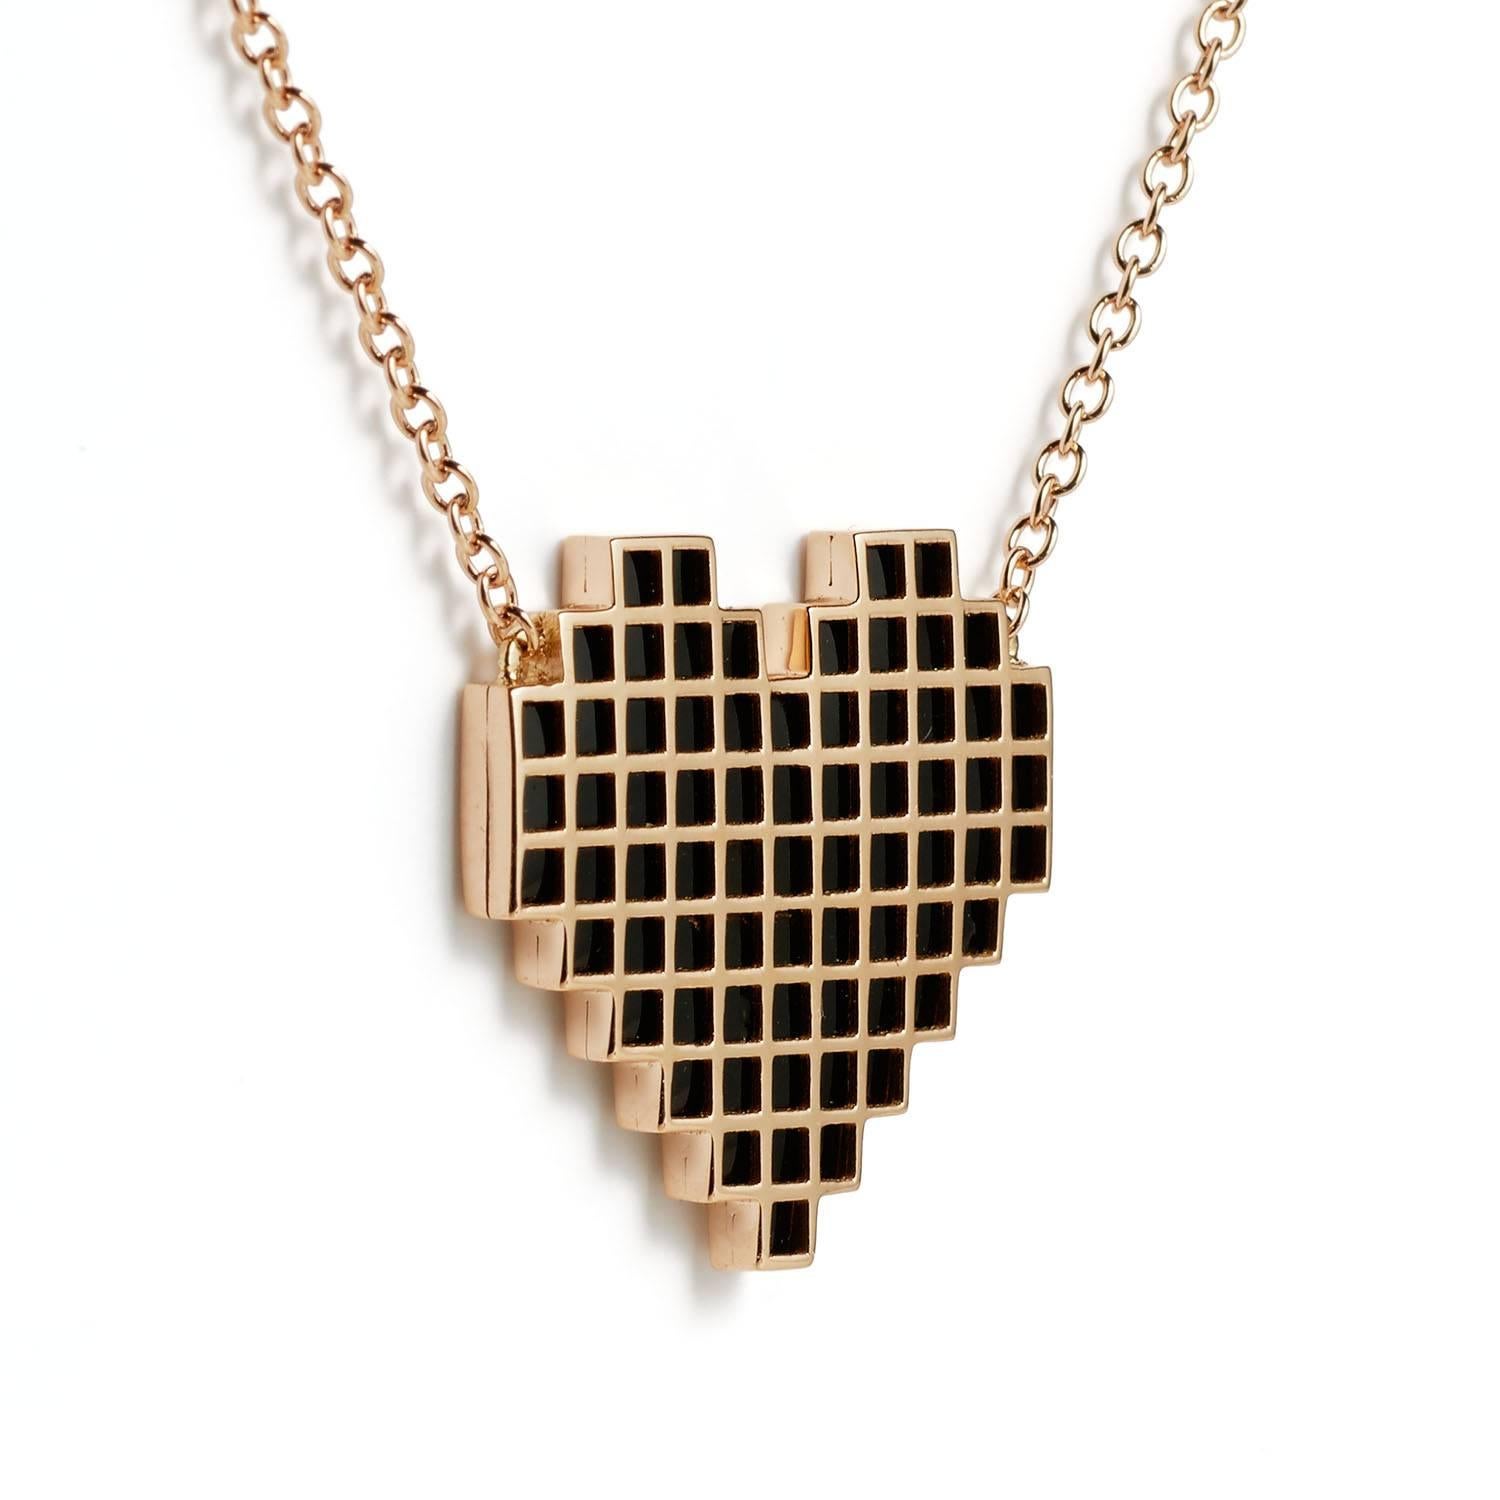 Francesca Grima Rose Gold Reversible Pixel Heart Necklace in Carbon Snow Enamel In New Condition For Sale In London, GB